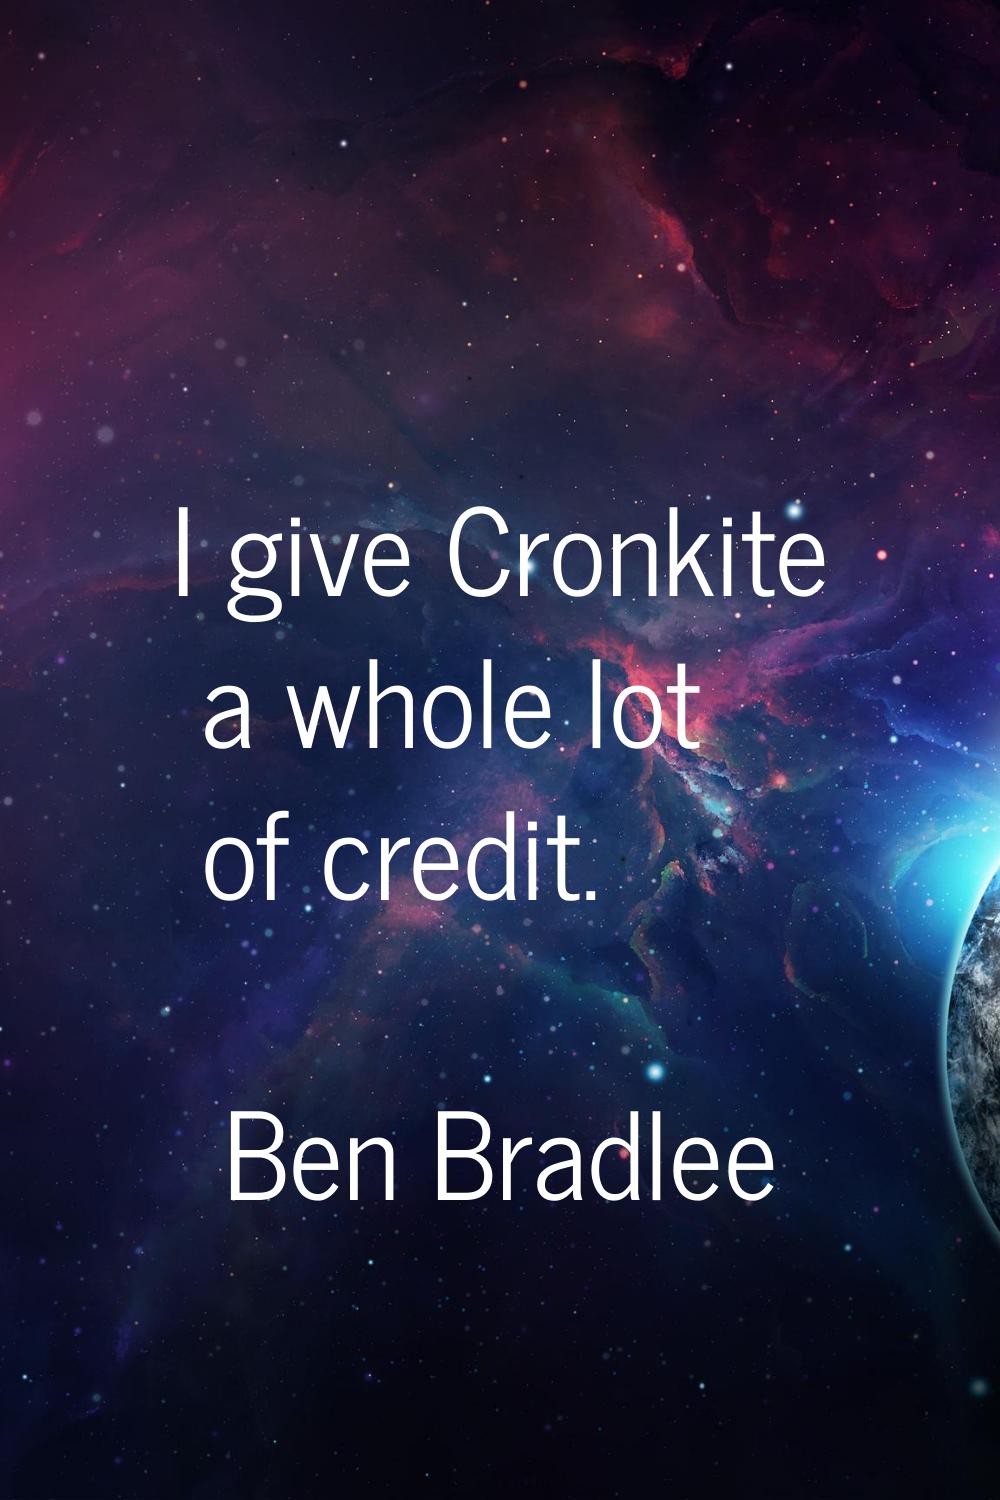 I give Cronkite a whole lot of credit.